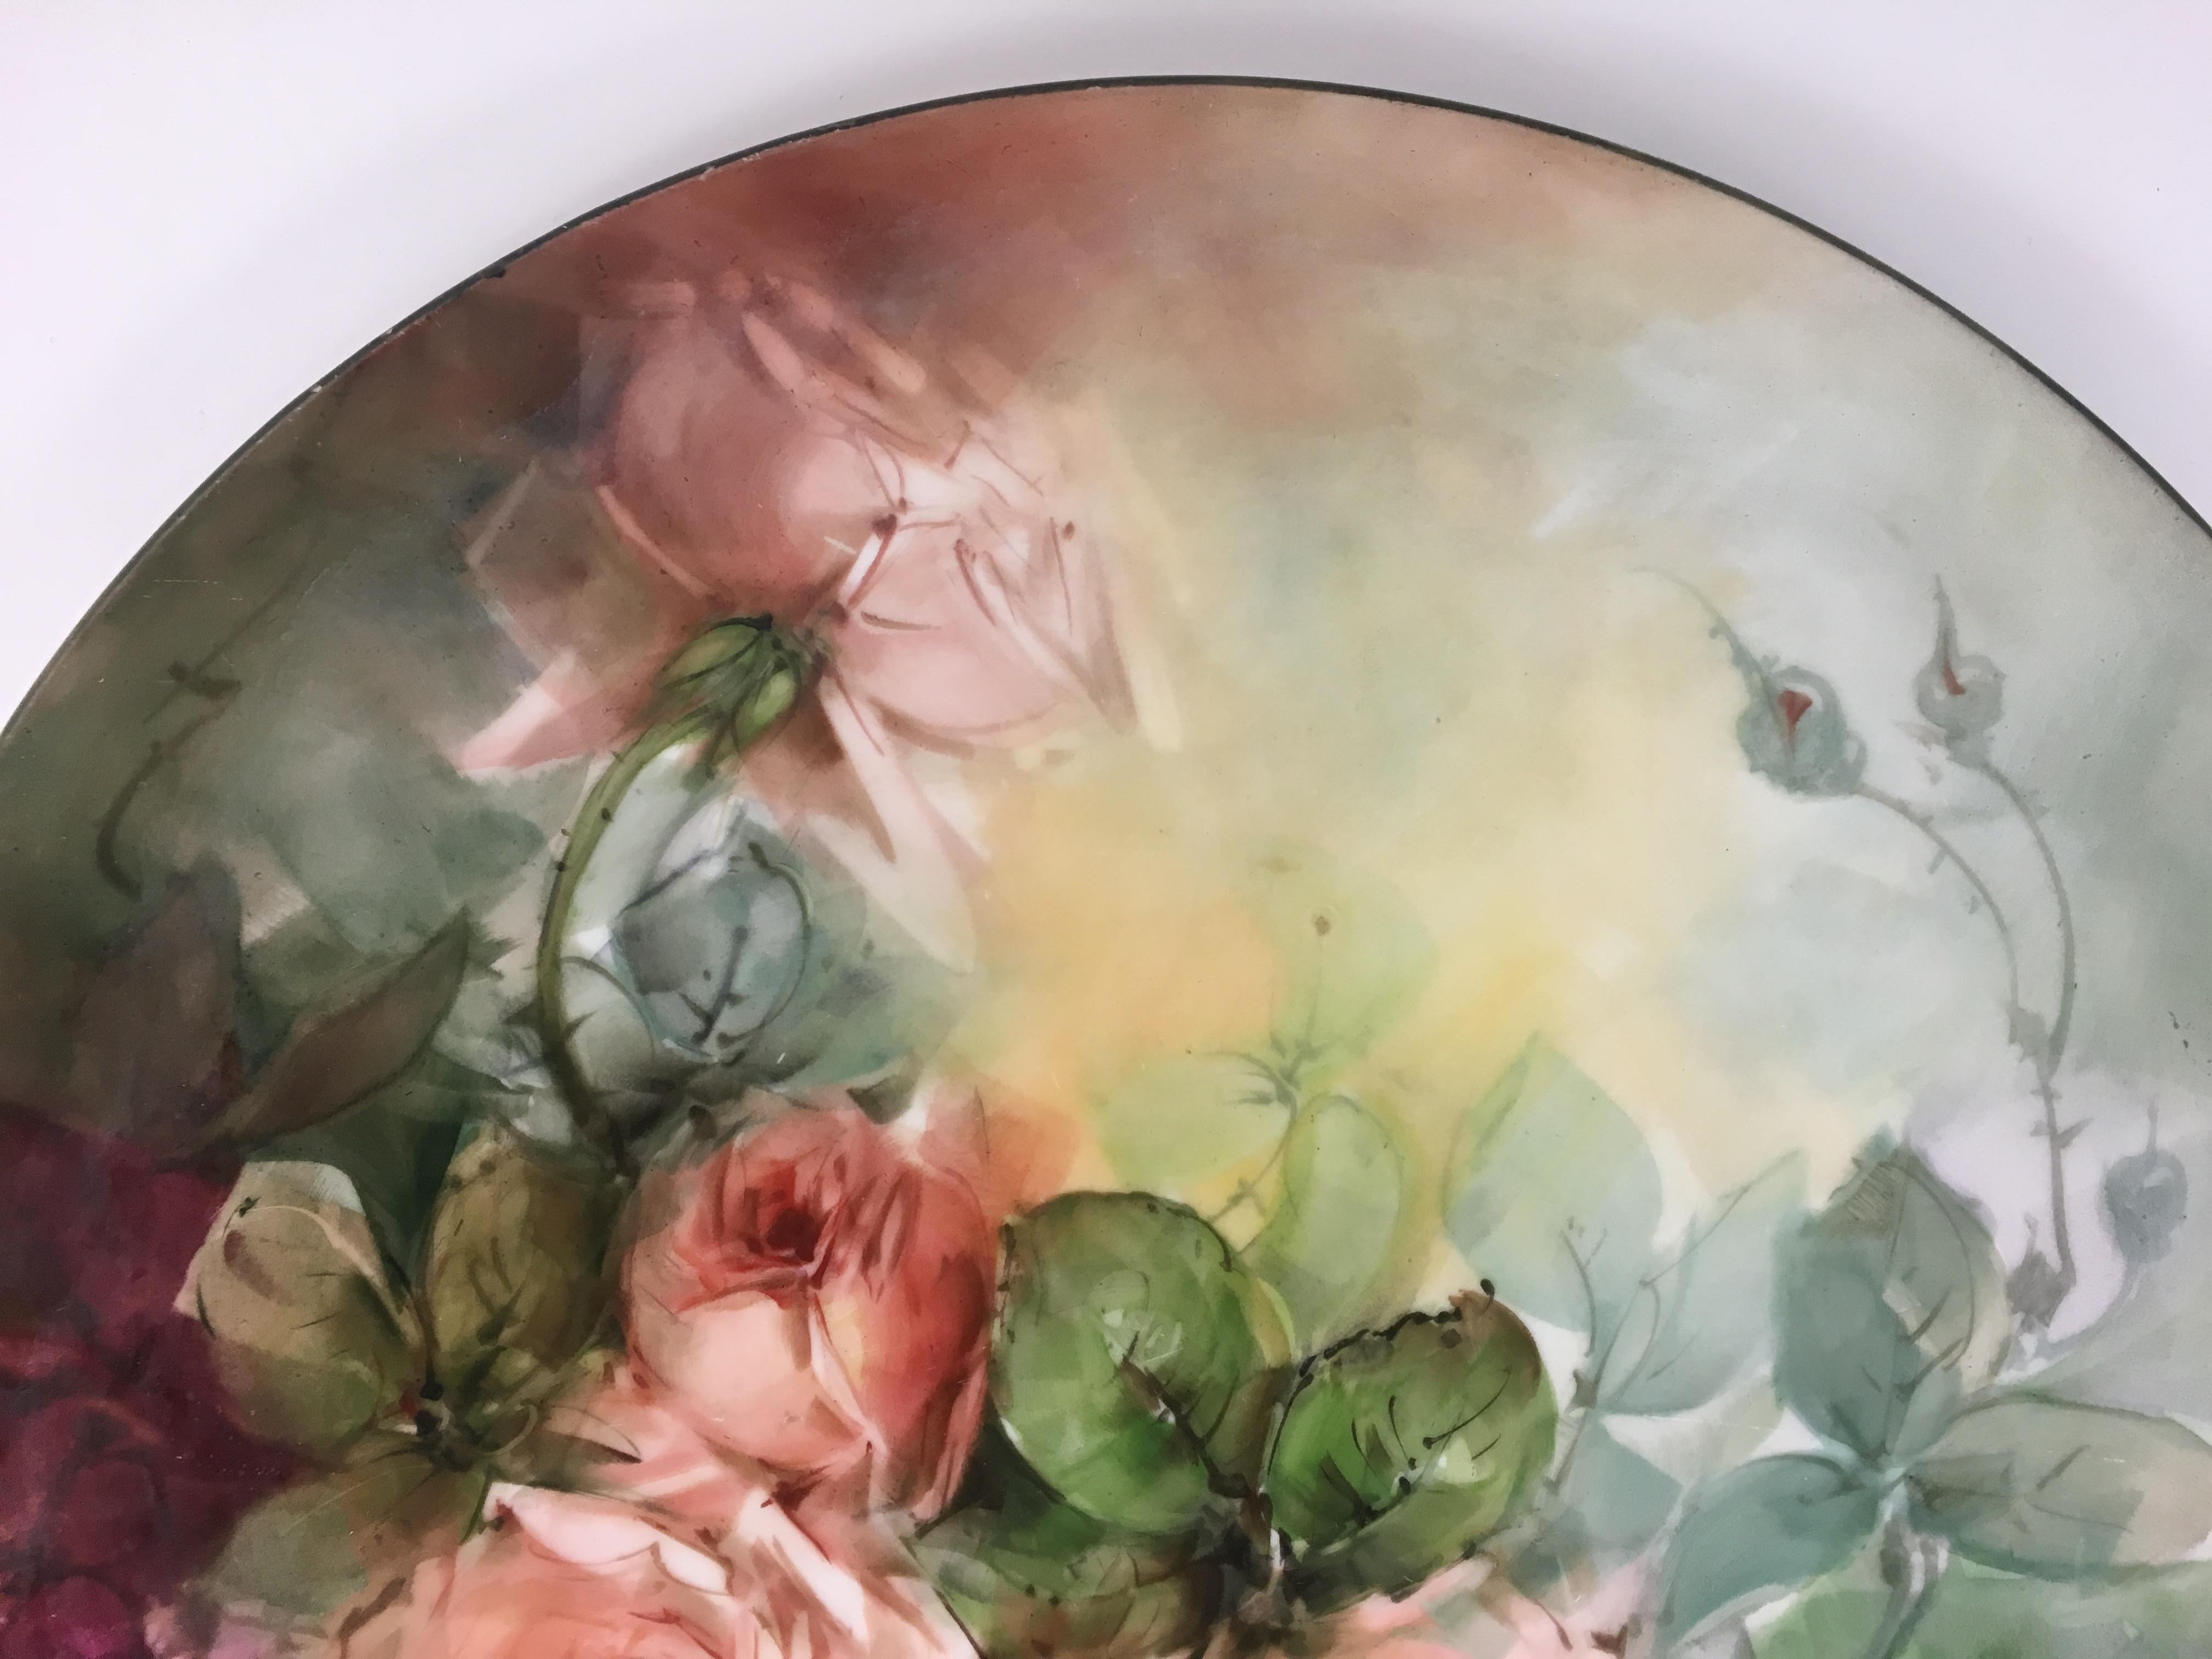 A fine and very decorative 20th century French Barbotine style majolica floral art charger or plate.

Painted in a neutral palette of white, green, pale pinks and yellow, this French barbotine style majolica floral platter or plate would make a